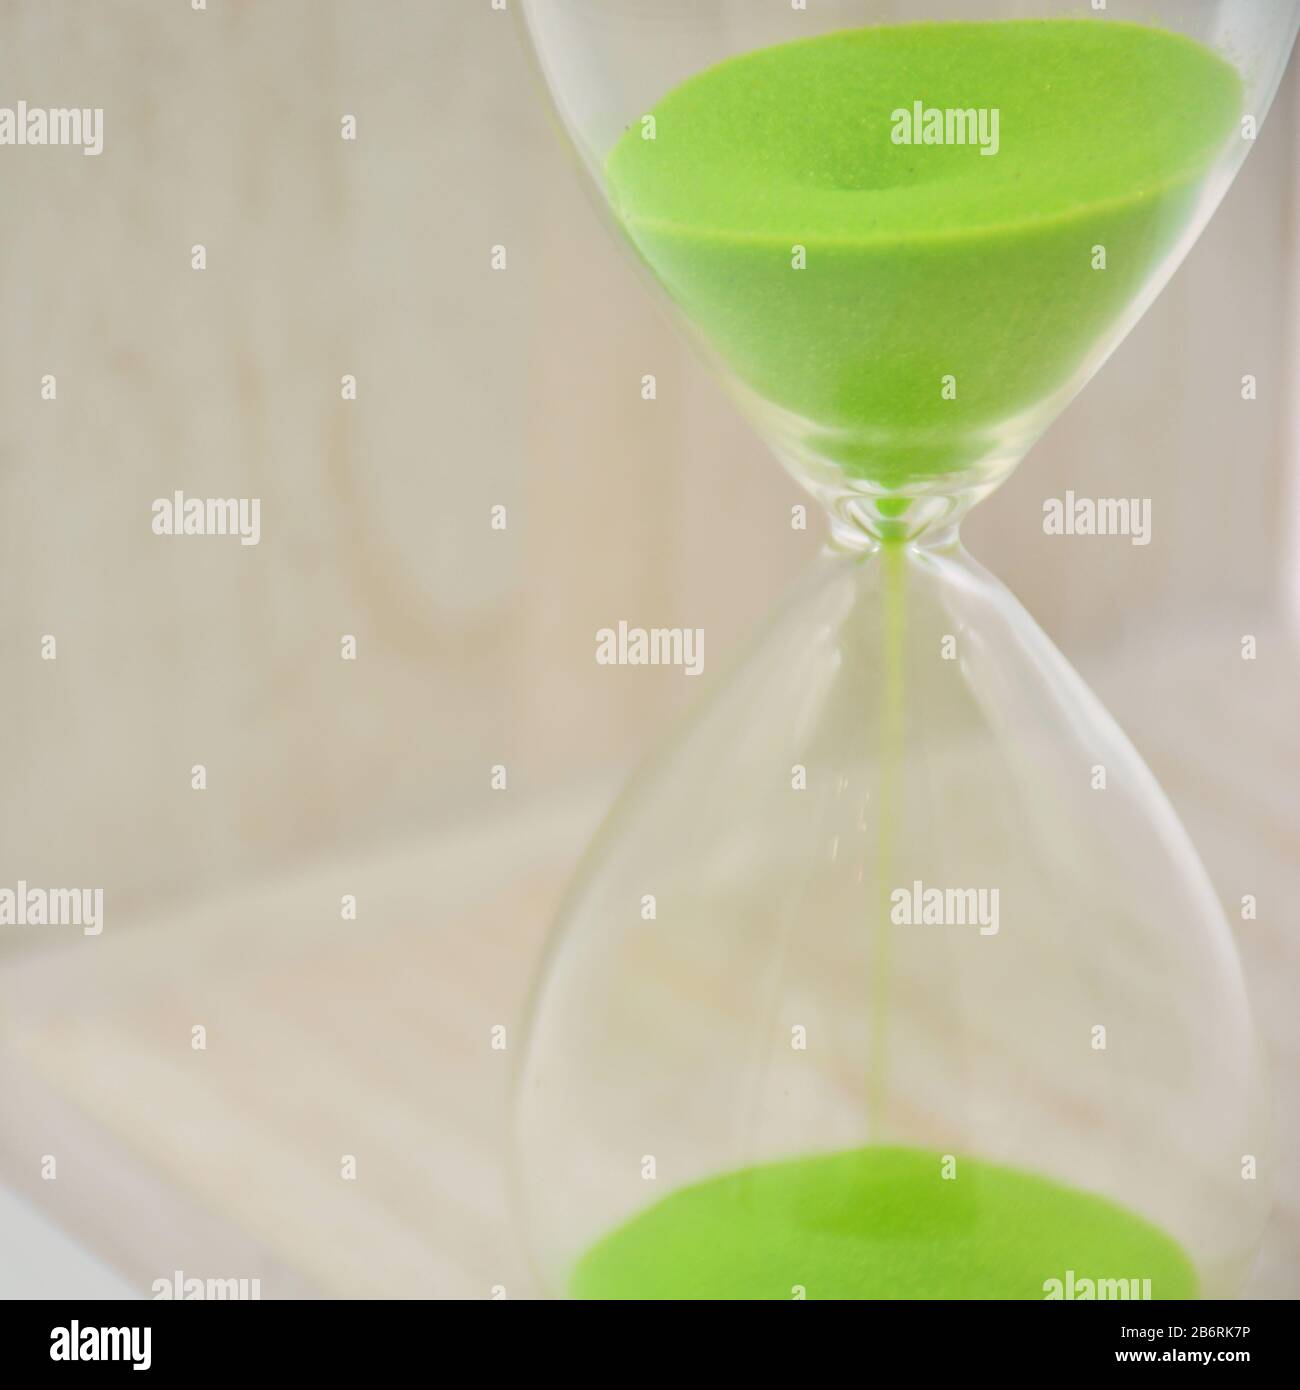 Hourglass, with green sand, arranged in different ways Stock Photo